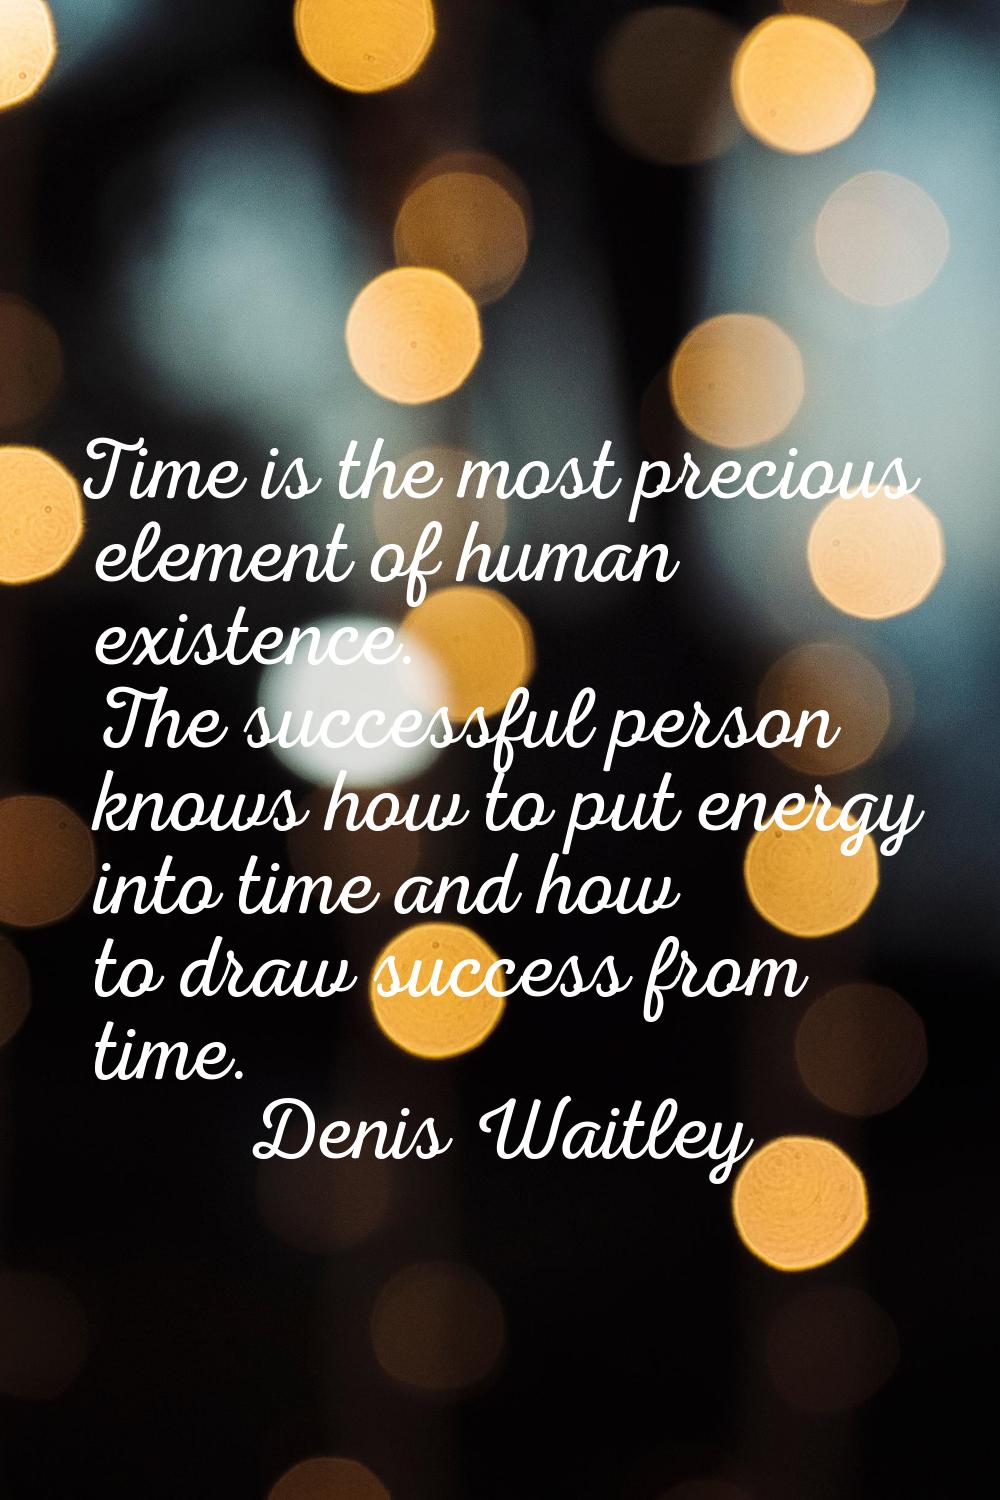 Time is the most precious element of human existence. The successful person knows how to put energy